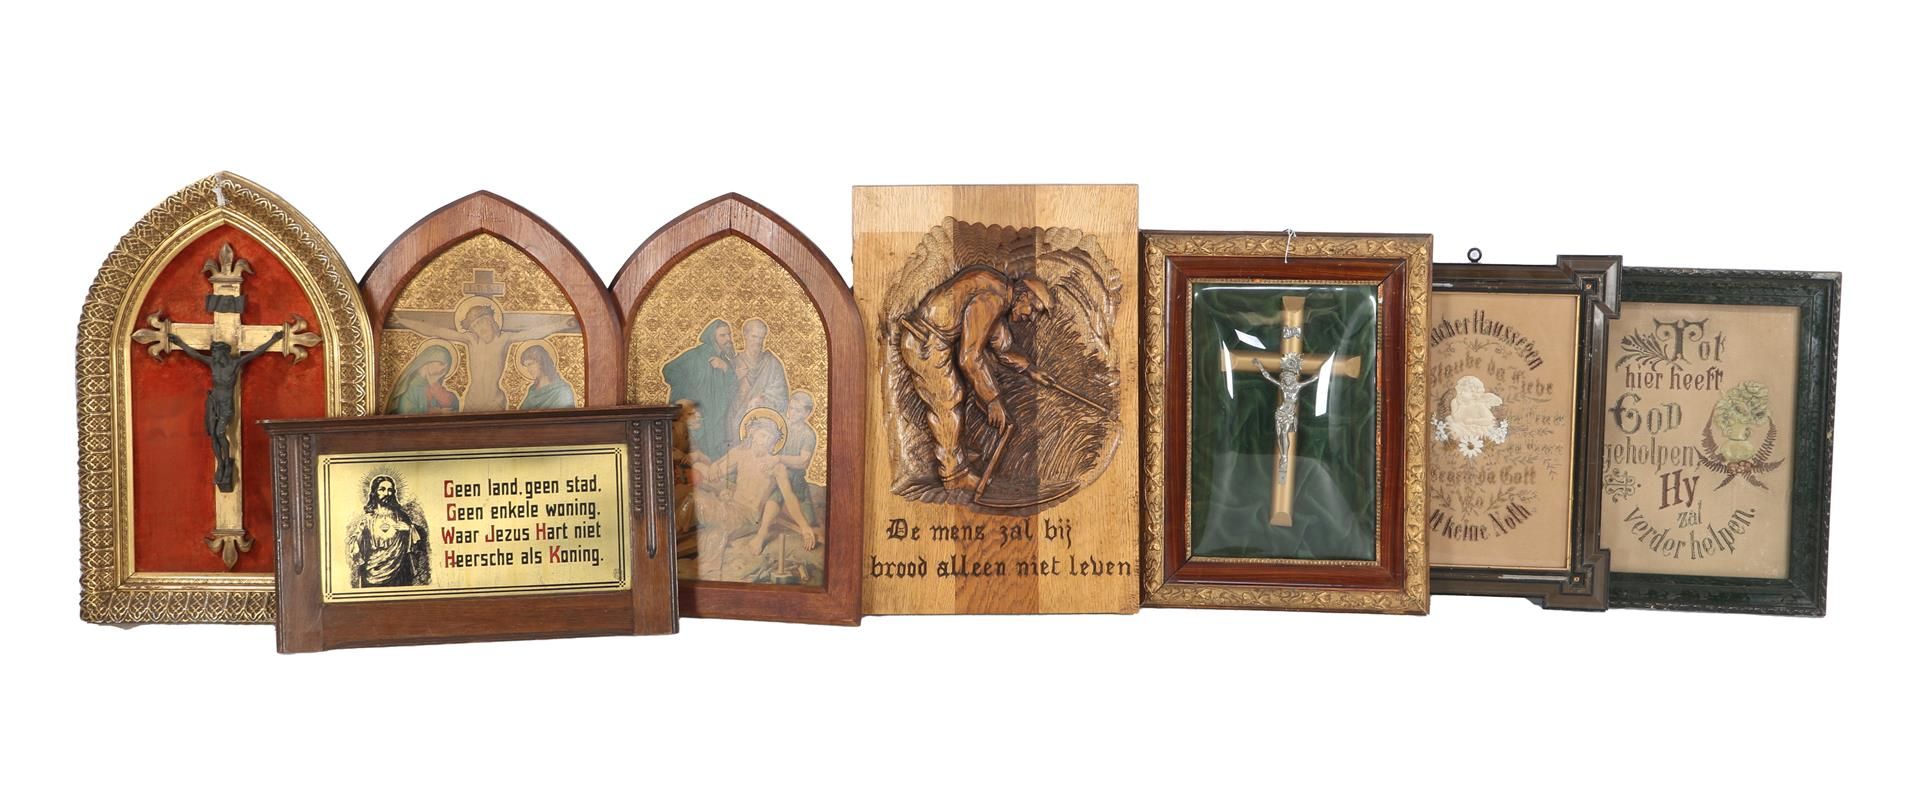 8 religious wall decorations